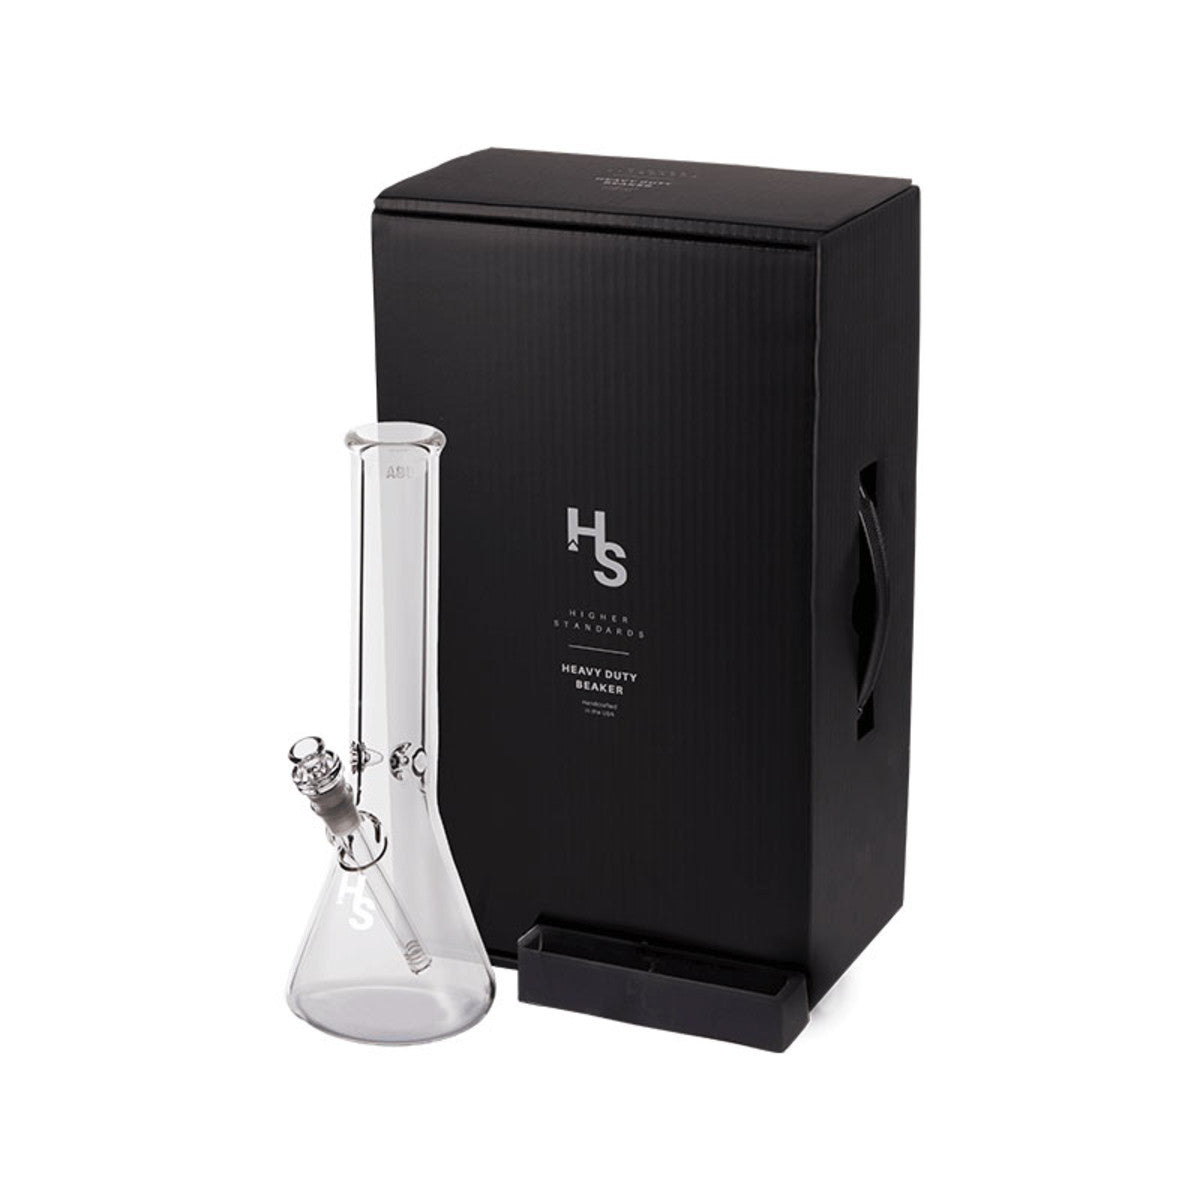 Higher Standards Heavy Duty Beaker Box. Handcrafted from Durable Medical-Grade Borosilicate Glass, the Heavy Duty Beaker is a Water Pipe Engineered to Rip with Maximum Filtration. Top Shelf CBD Hemp Flower. MOST DIVERSE CBD CONCENTRATE COLLECTION ON THE WEB. Live Resin, Wax, Shatter, Crumble, Diamonds &amp;MORE! Glass Rigs, Pipes. Dab, Vape, Smoke Accessories - Sauce Warehouse